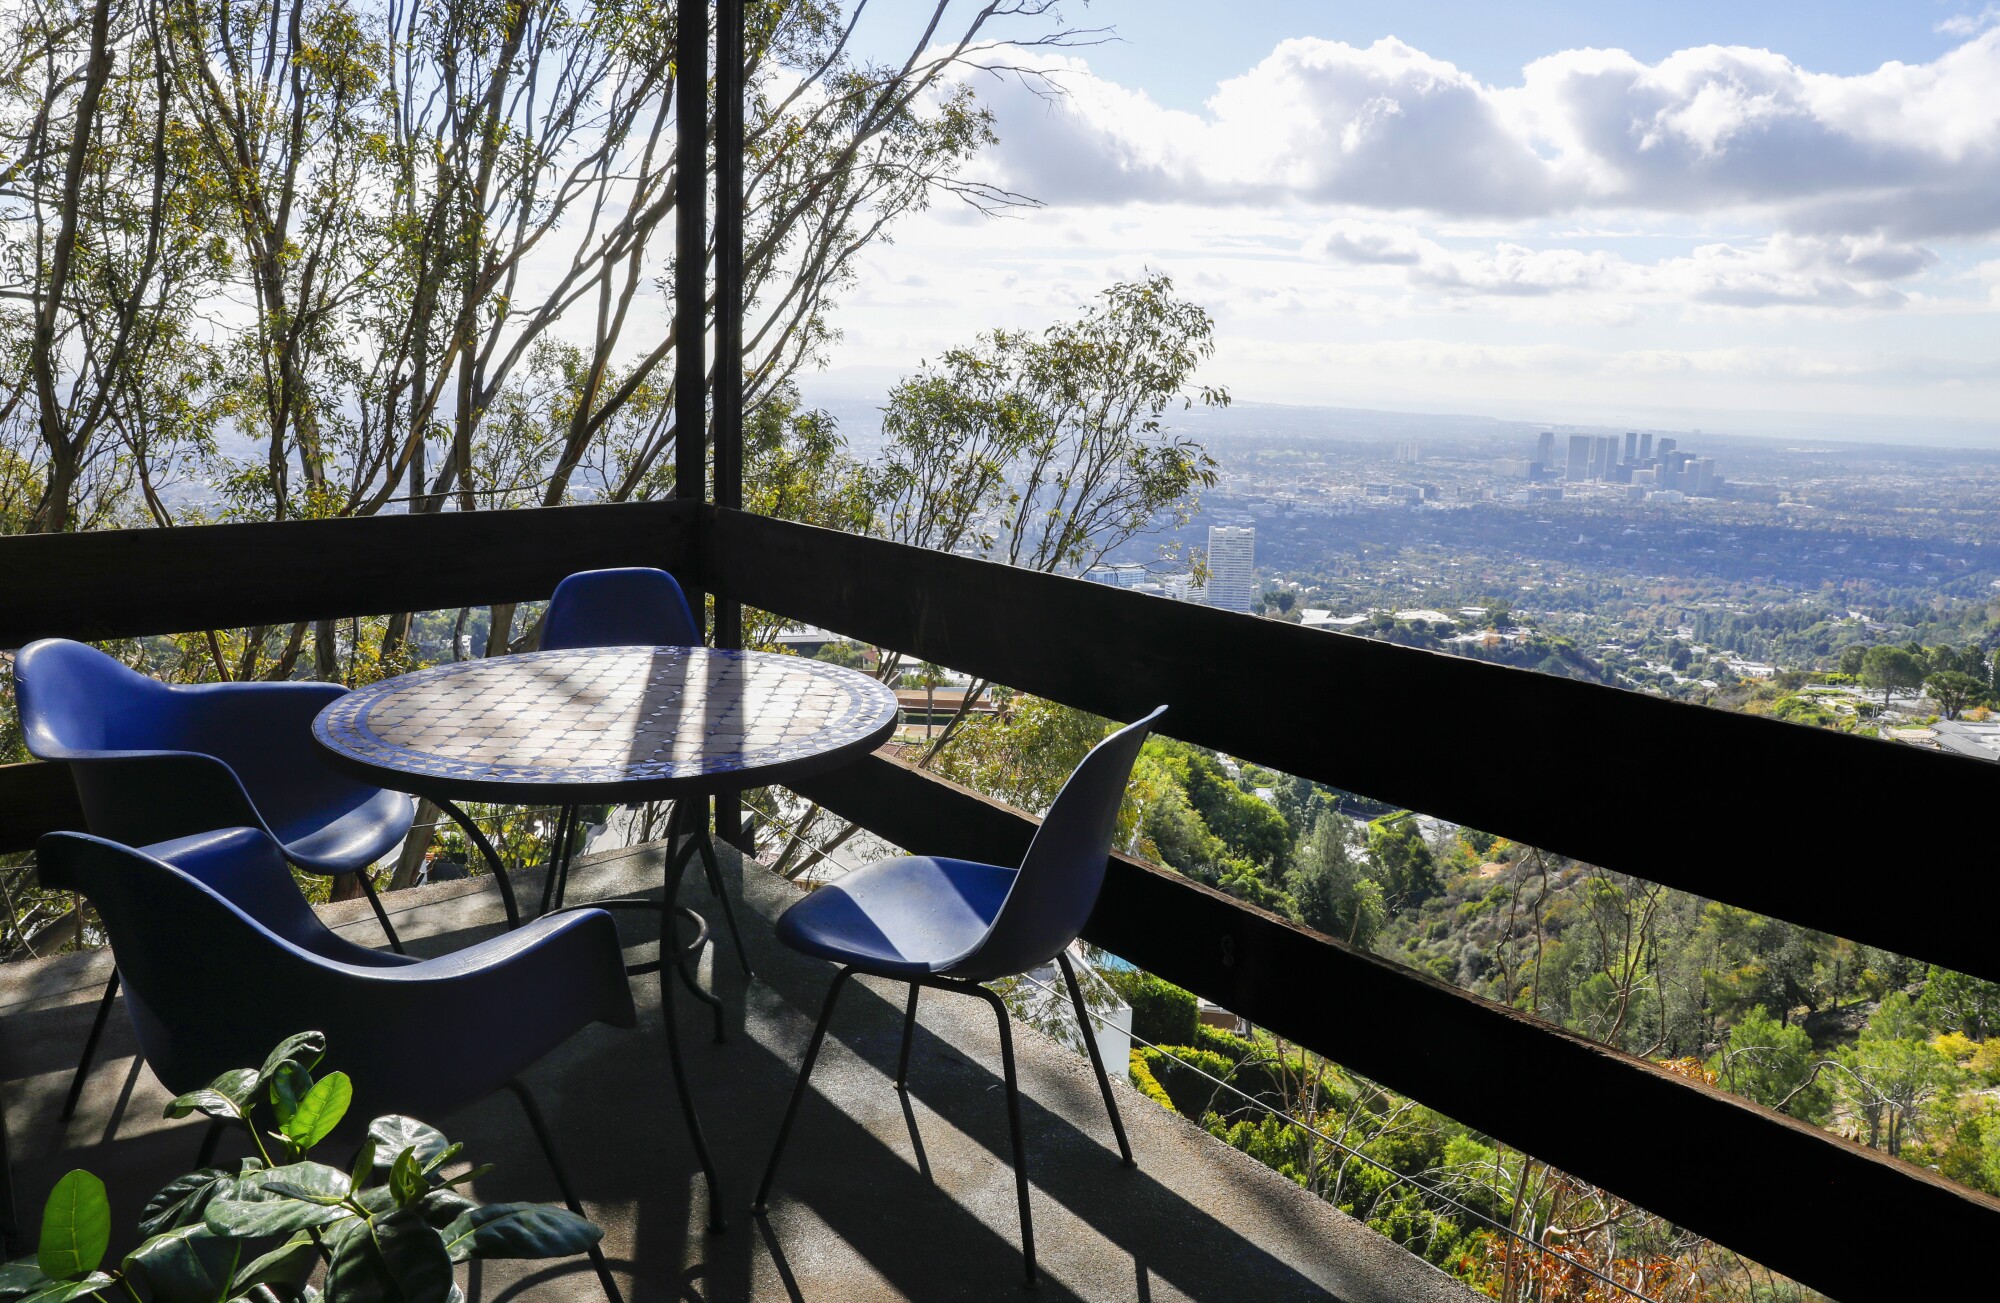 A view of the Los Angeles Basin on a sunny day after a rainy from the deck of Bernard Judge's Tree House